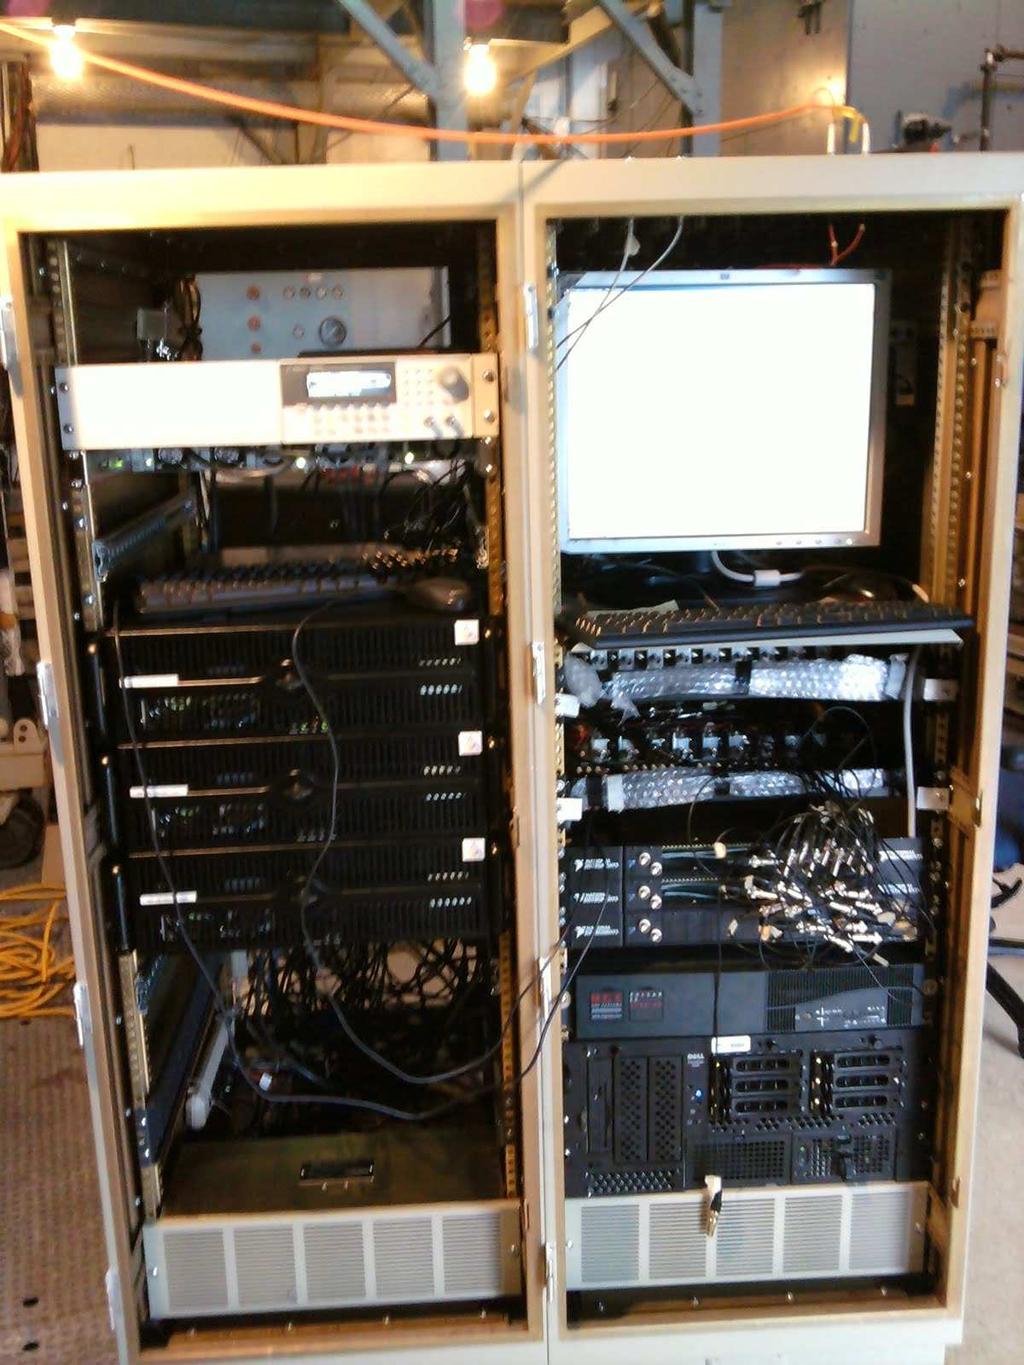 Figure 4.4: The data acquisition rack with acquisition computers and a hub, along with the old data acquisition computer and IF trays.